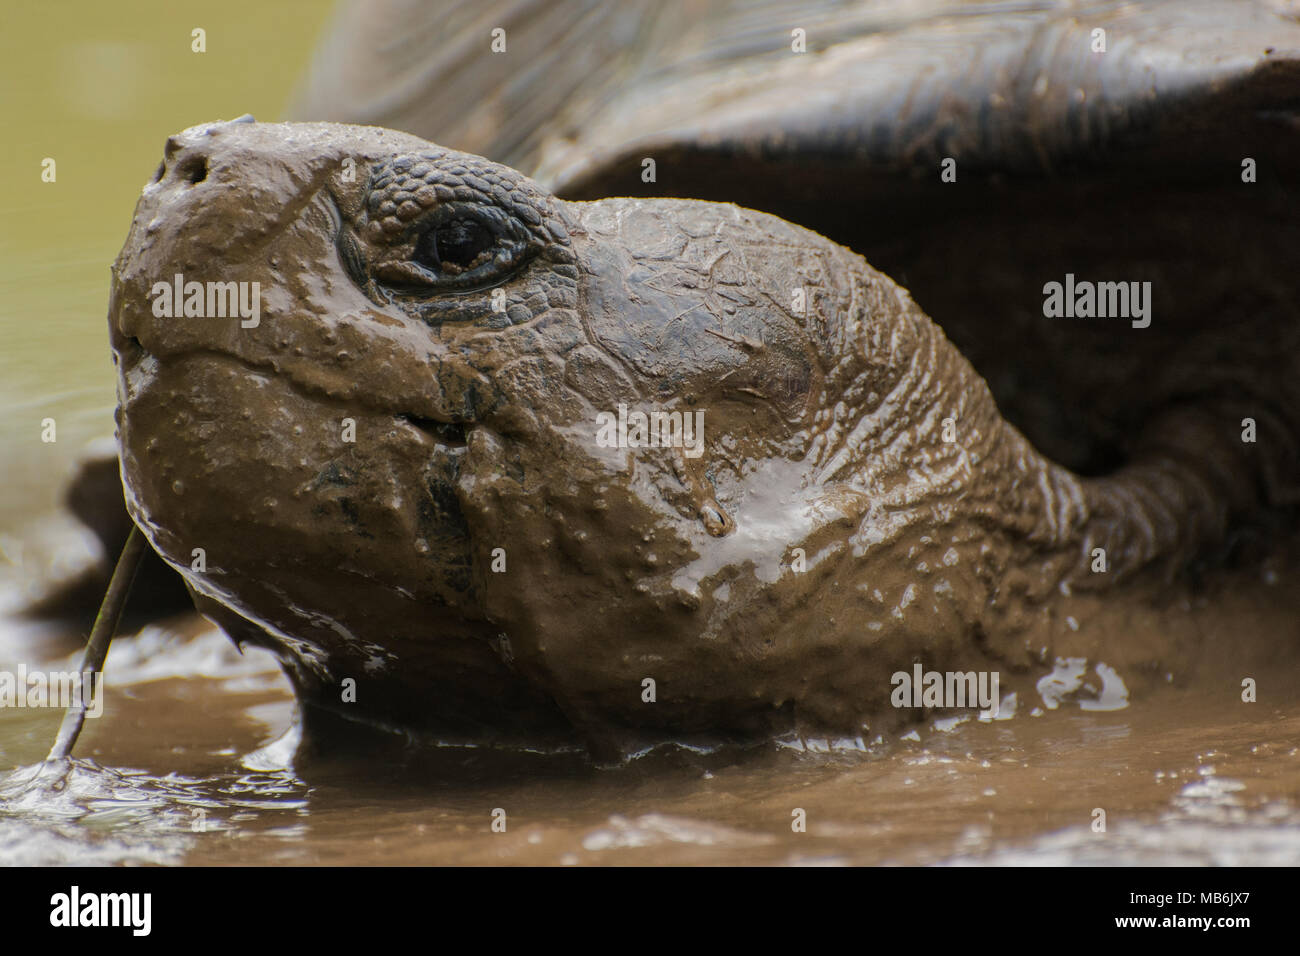 A galapagos giant tortoise (Chelonoidis nigra) taking a mud bath in order to escape the heat. These are only found on the Galapagos islands. Stock Photo